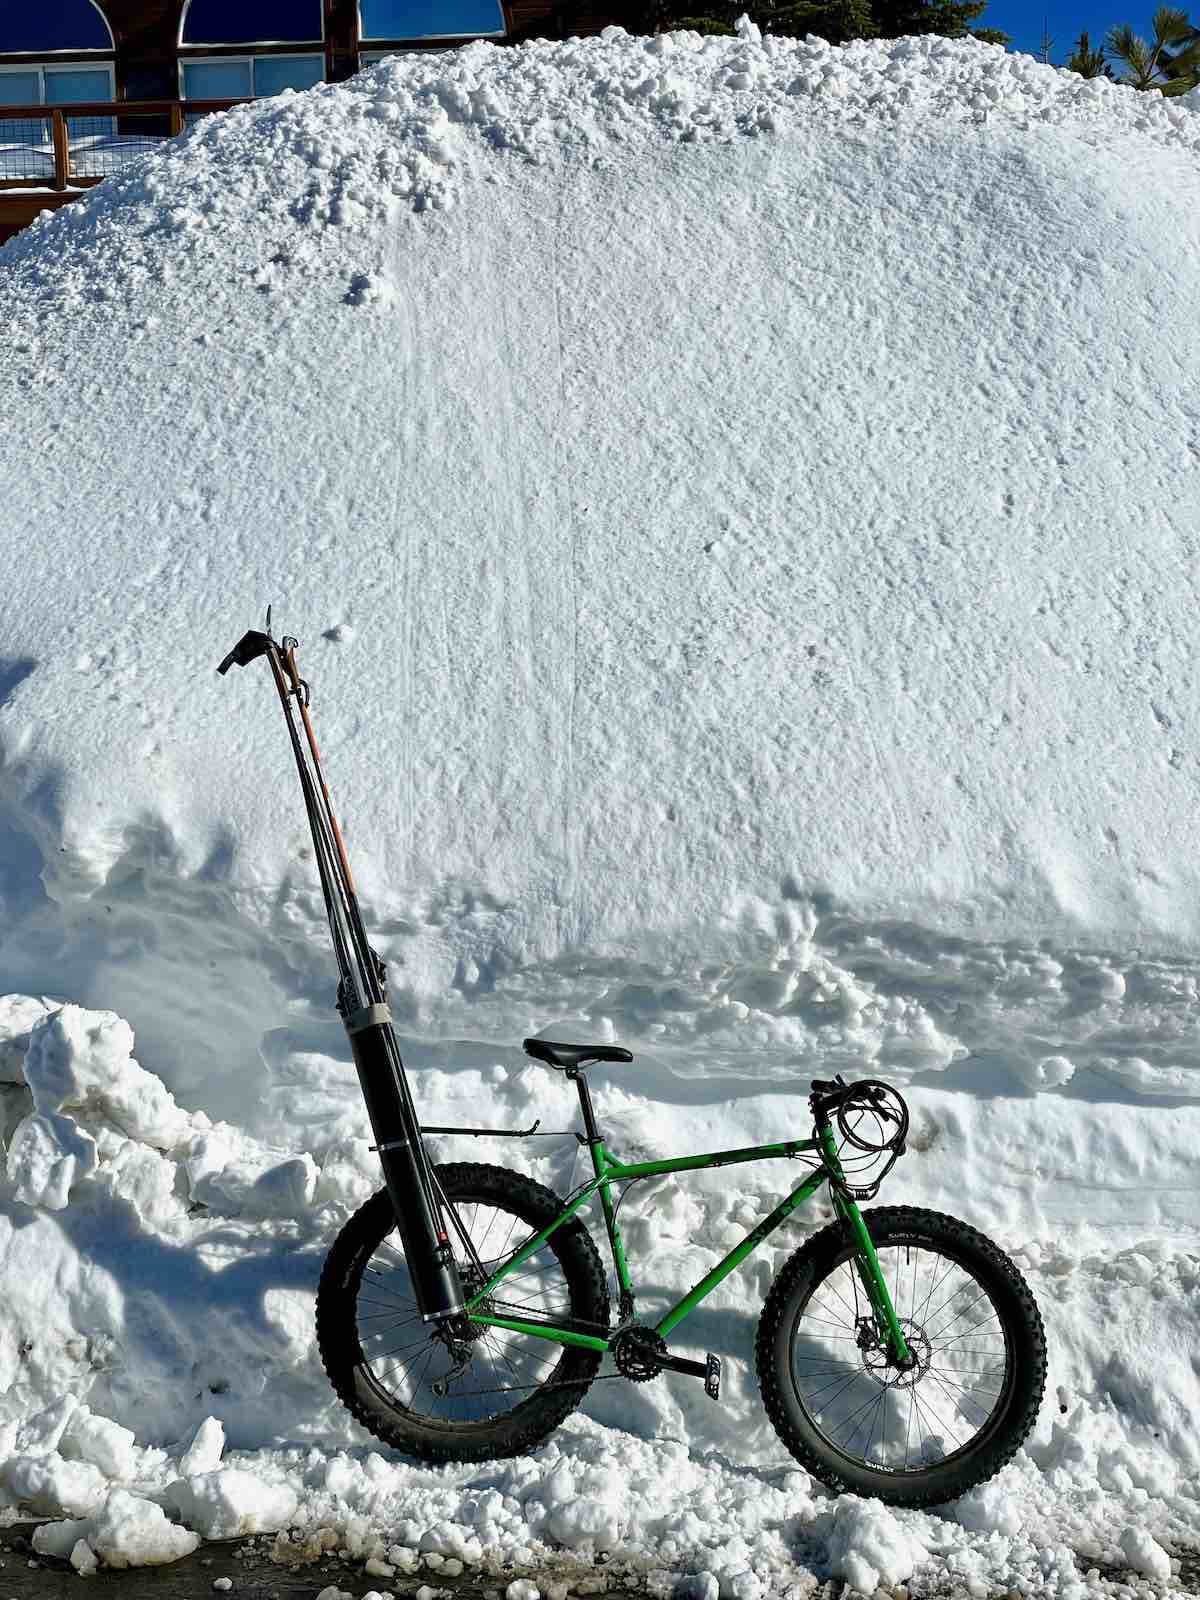 bikerumor pic of the day a fat bike with skis in a pack on the back sits next to a giant pile of snow.